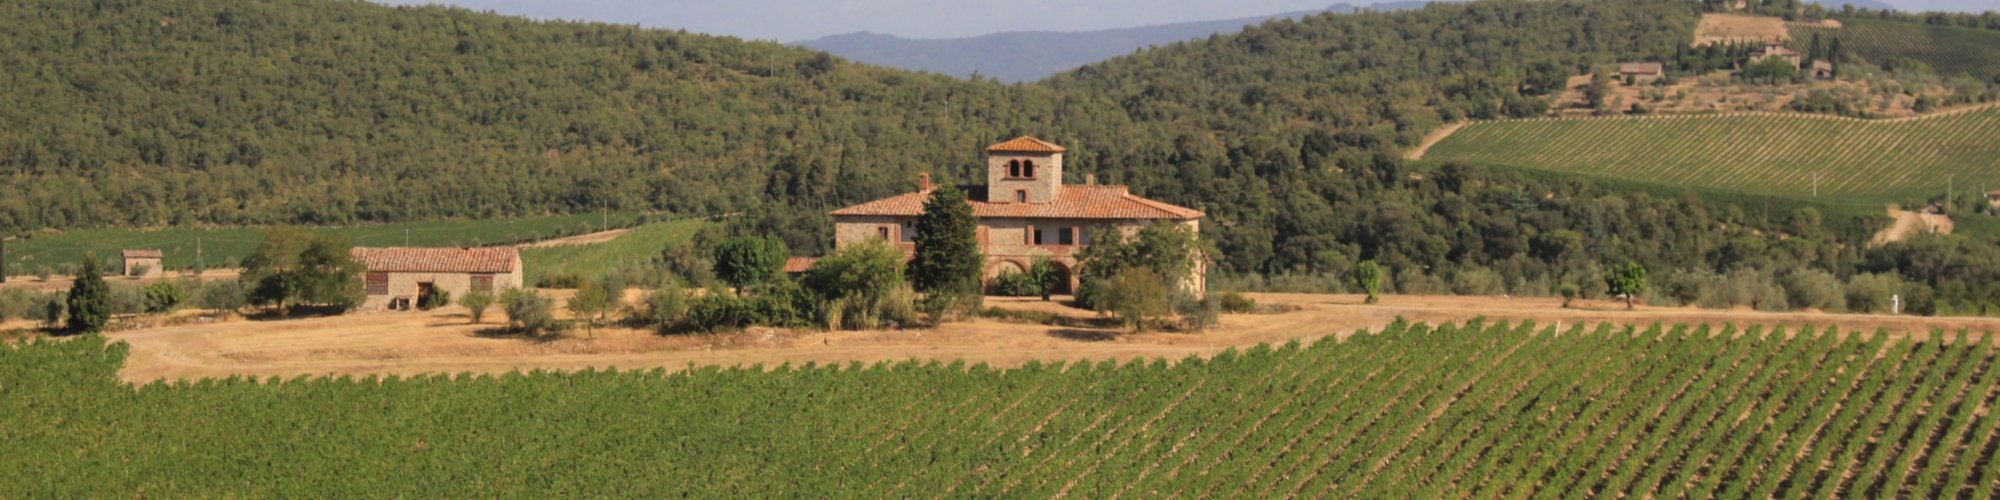 The house from Stealing Beauty in Gaiole in Chianti